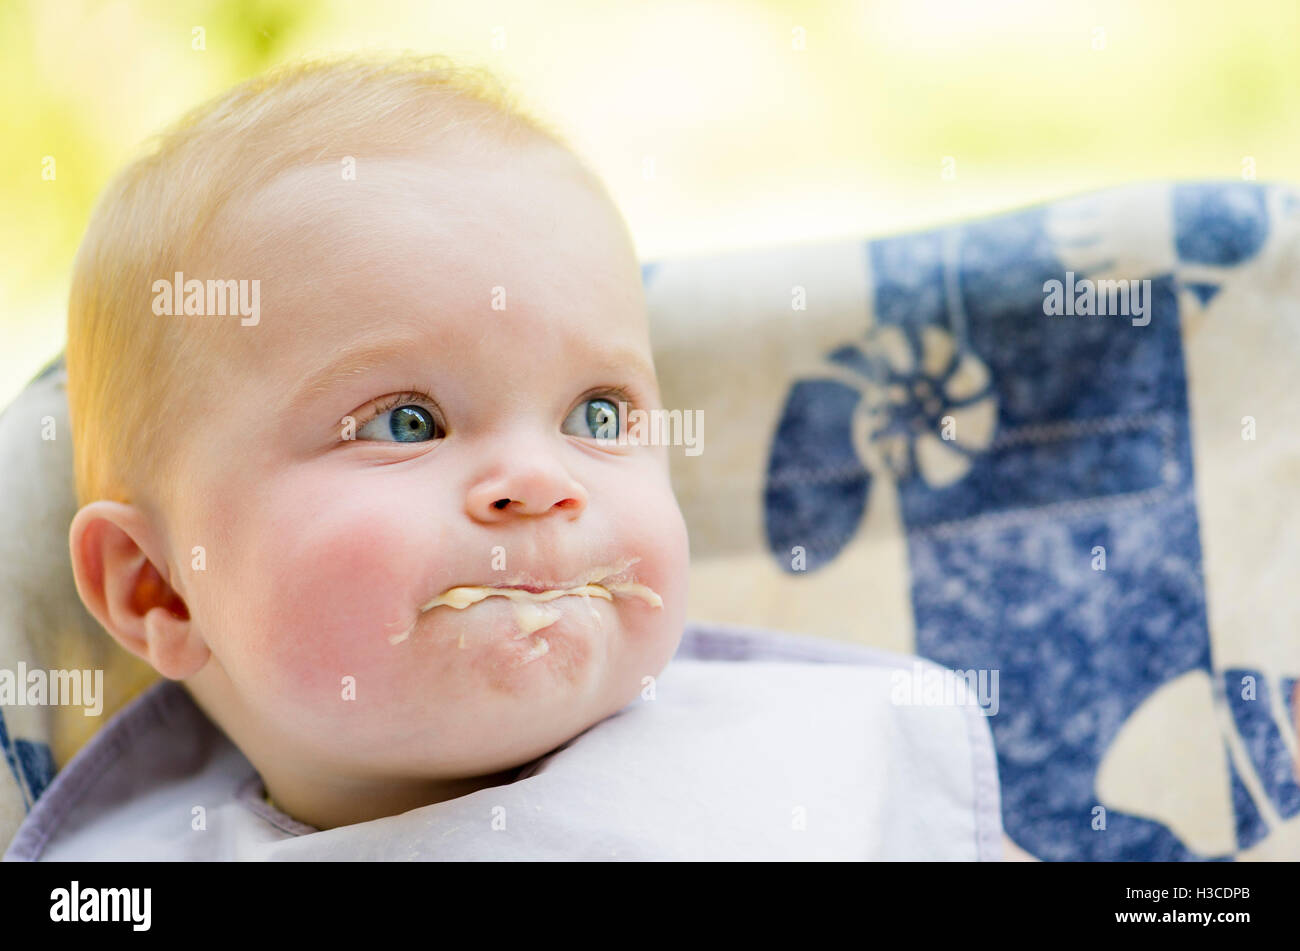 Messy baby eating, portrait Stock Photo